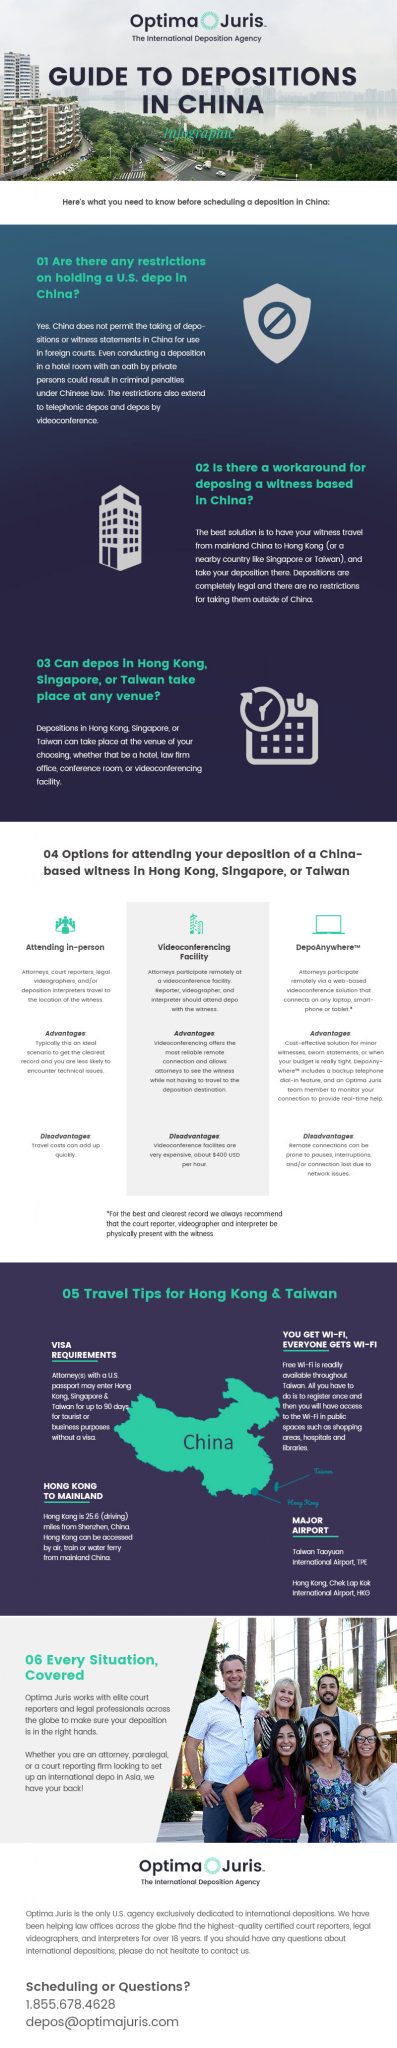 A deposition guide for depositions in China